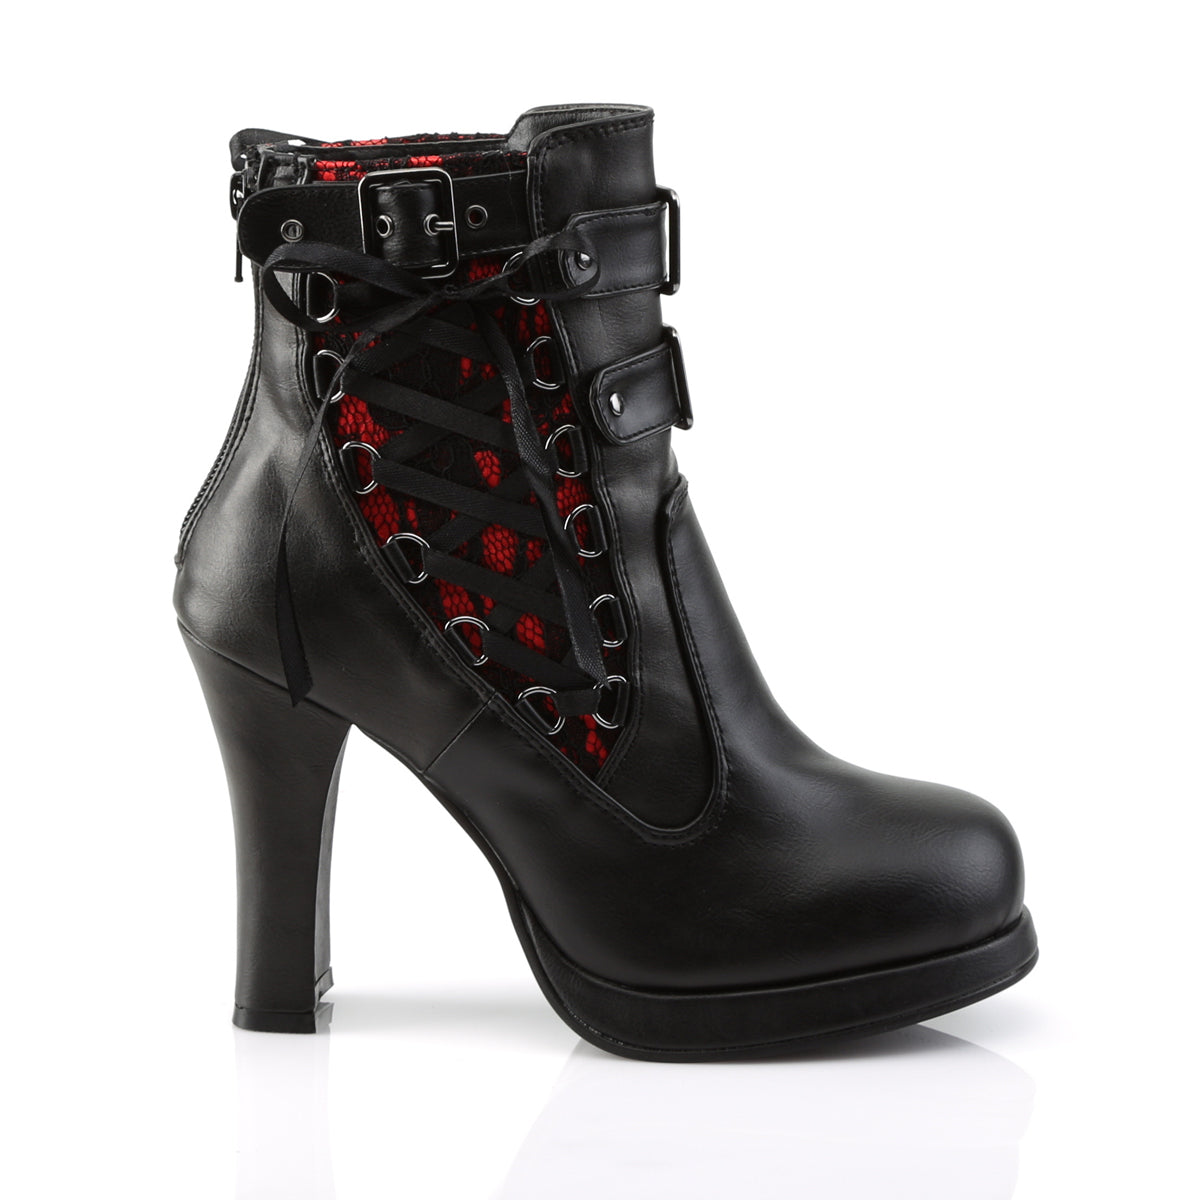 CRYPTO-51 Black-Red Lace Vegan Leather Ankle Boot Demonia